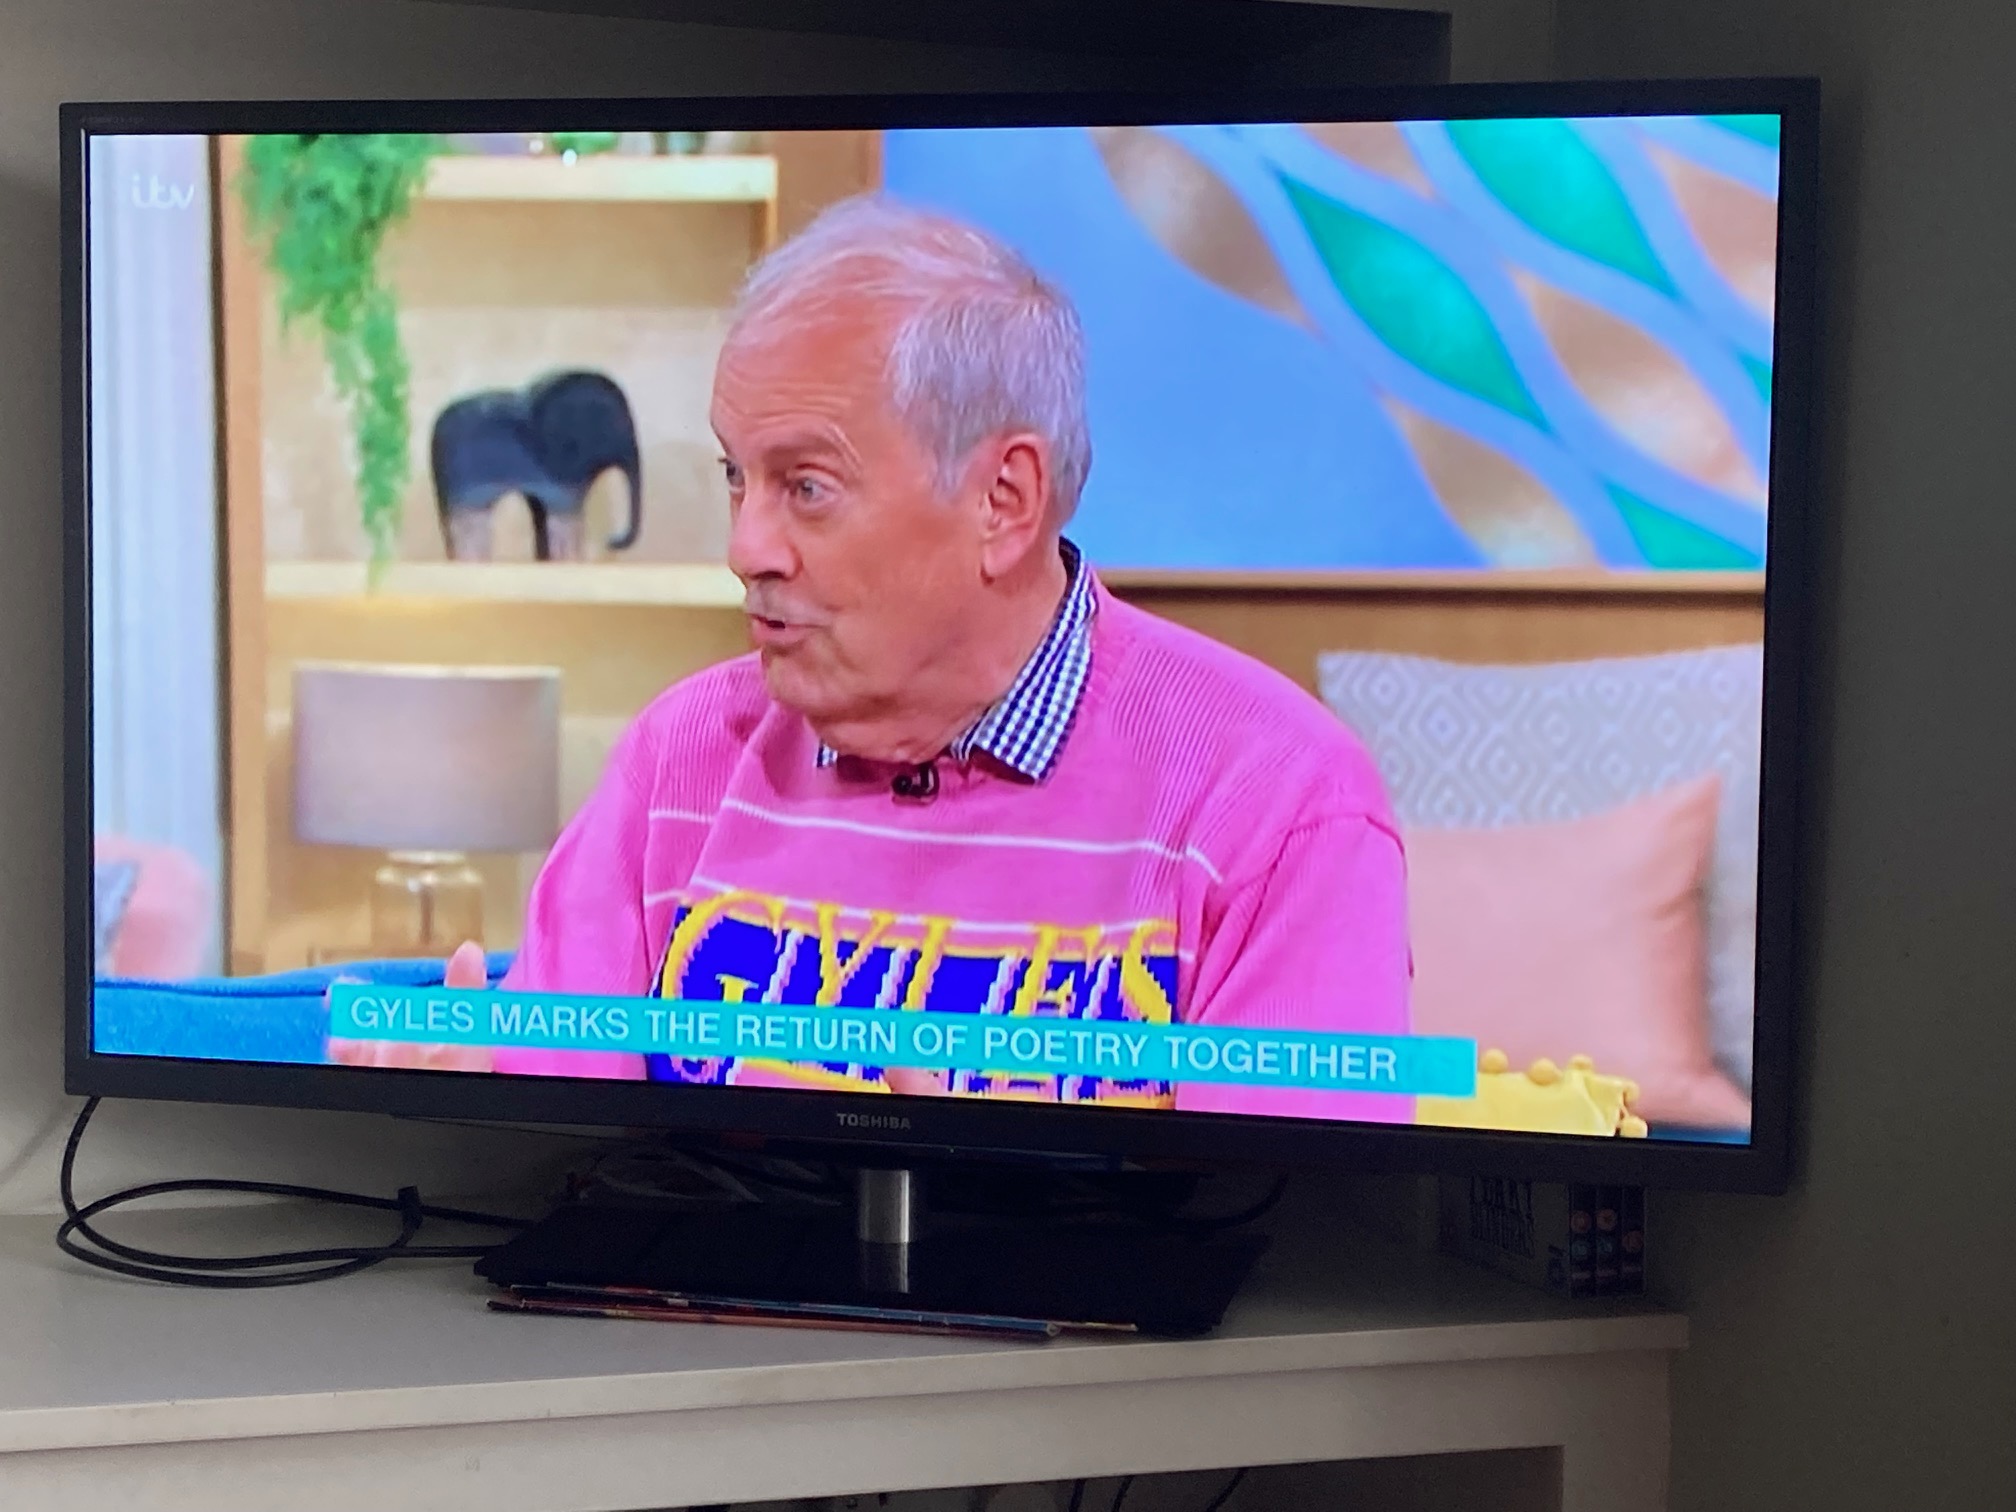 Gyles Brandreth chats with ITV about Poetry Together 2021